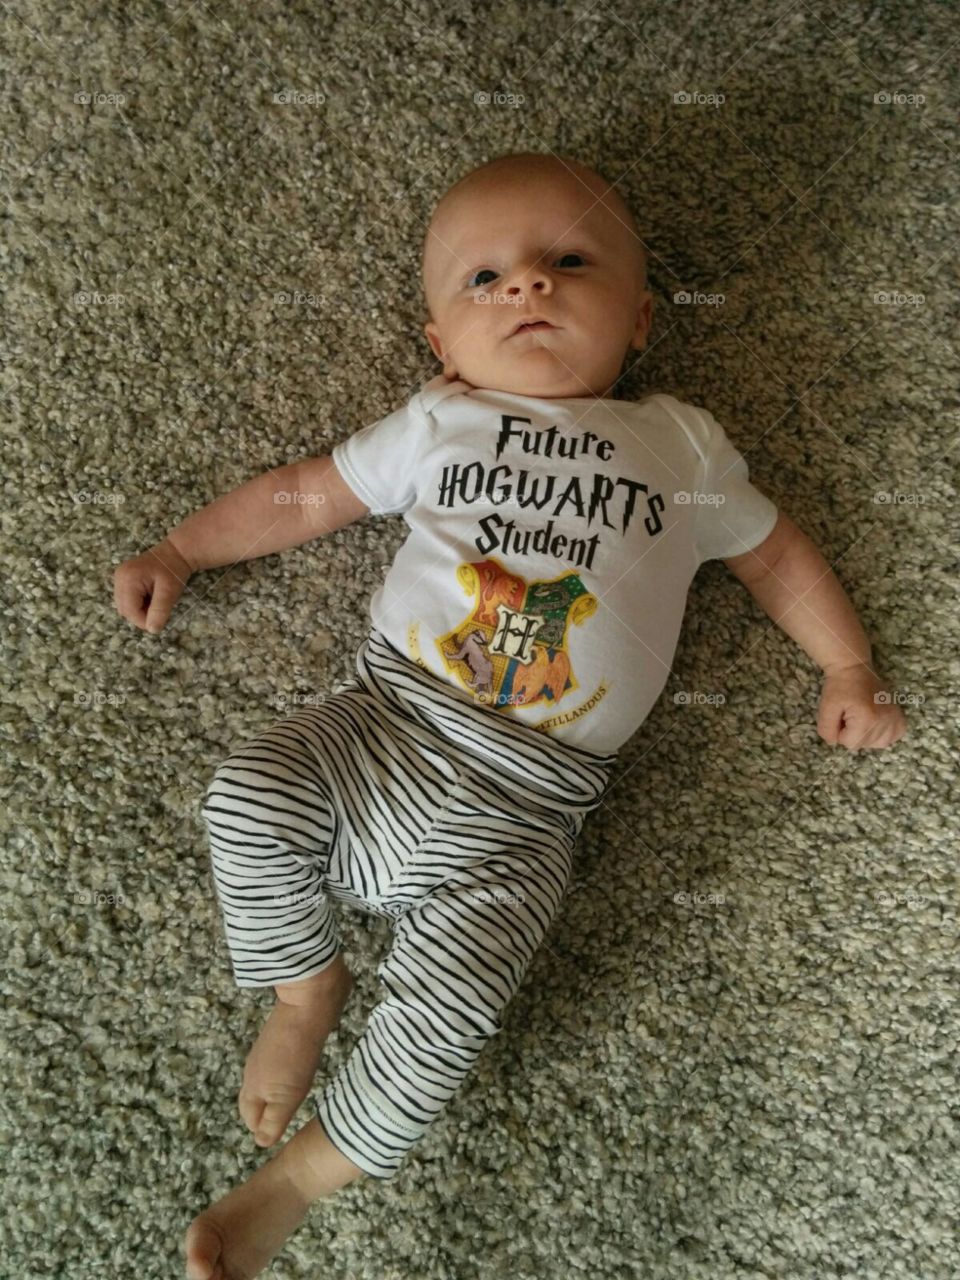 Baby Oliver ready for hogwarts 